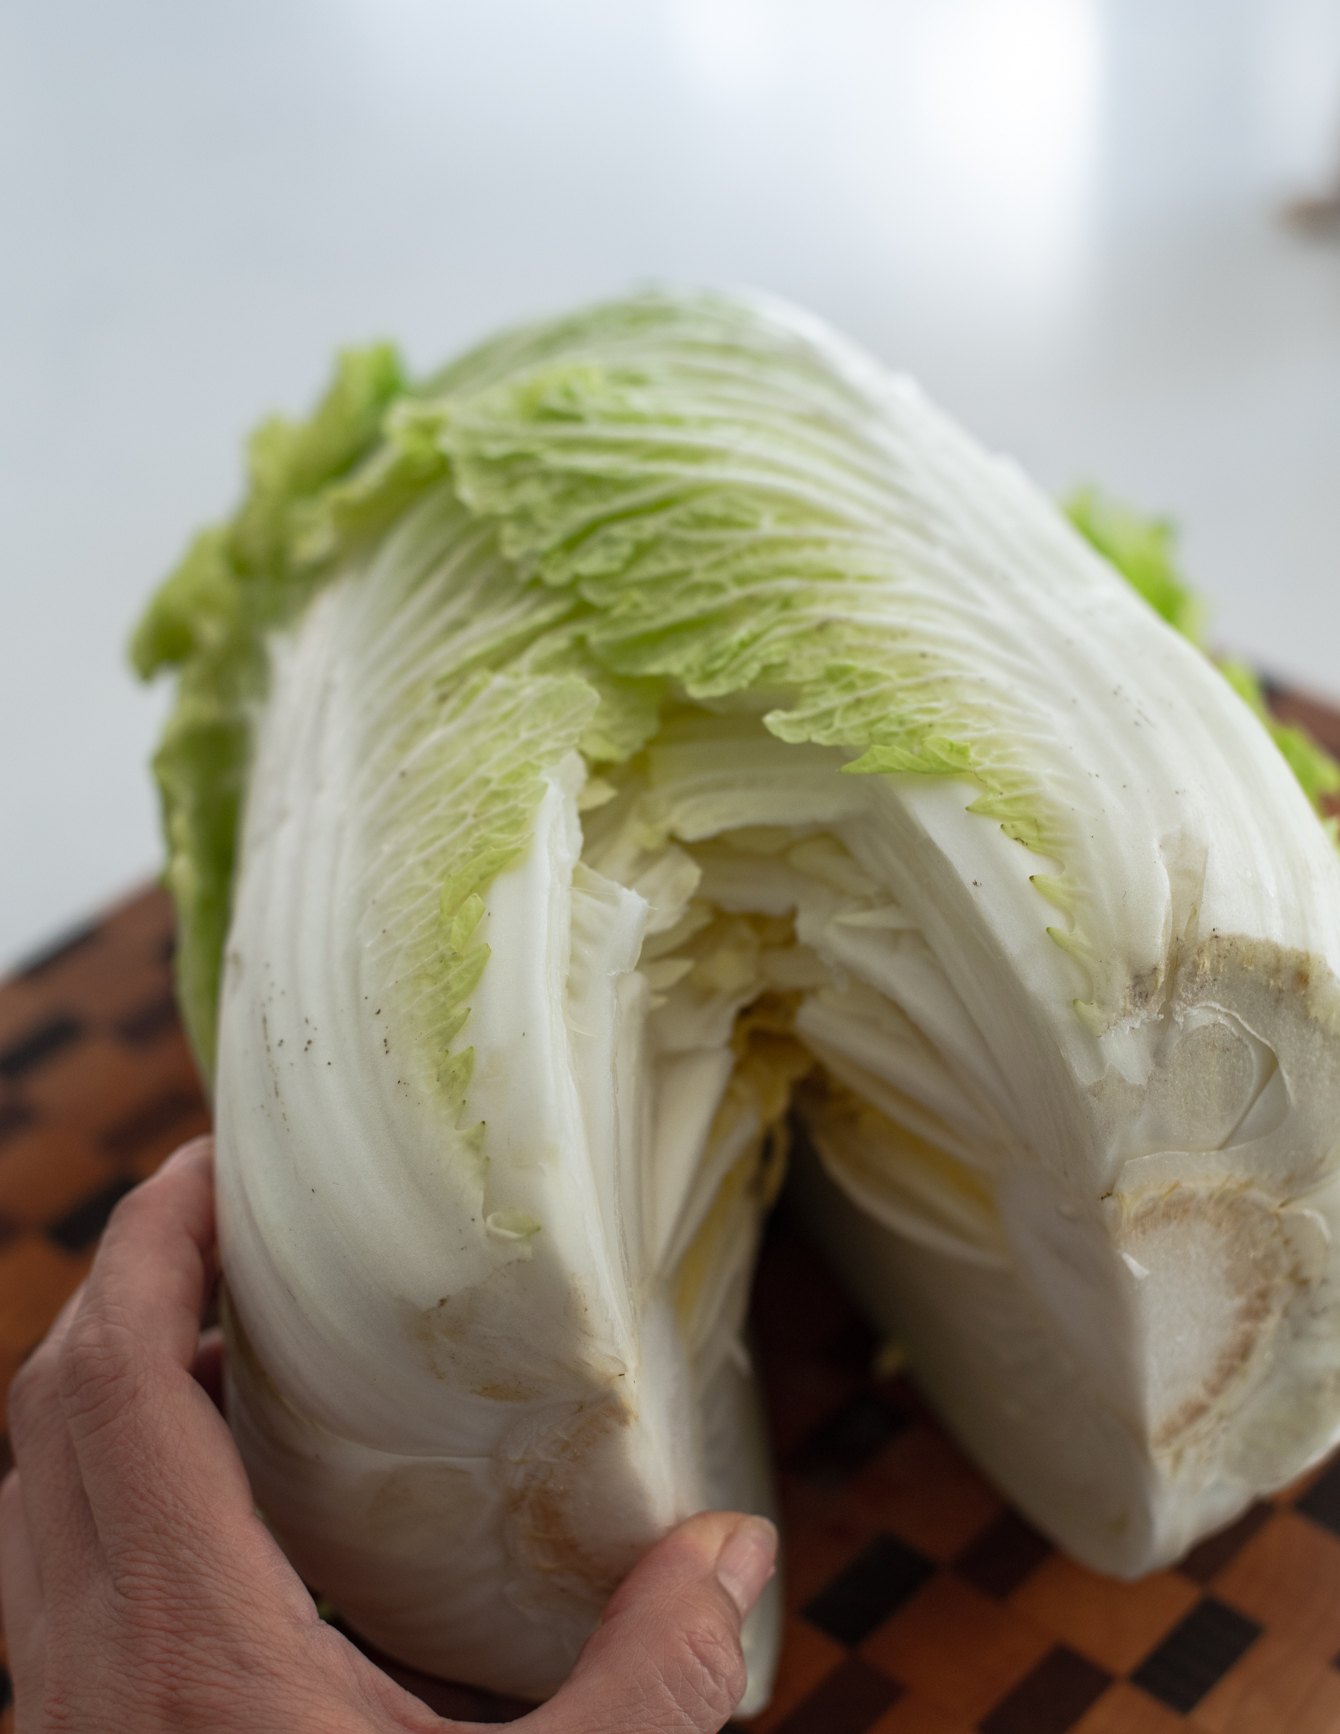 Splitting a head of cabbage in half by hand